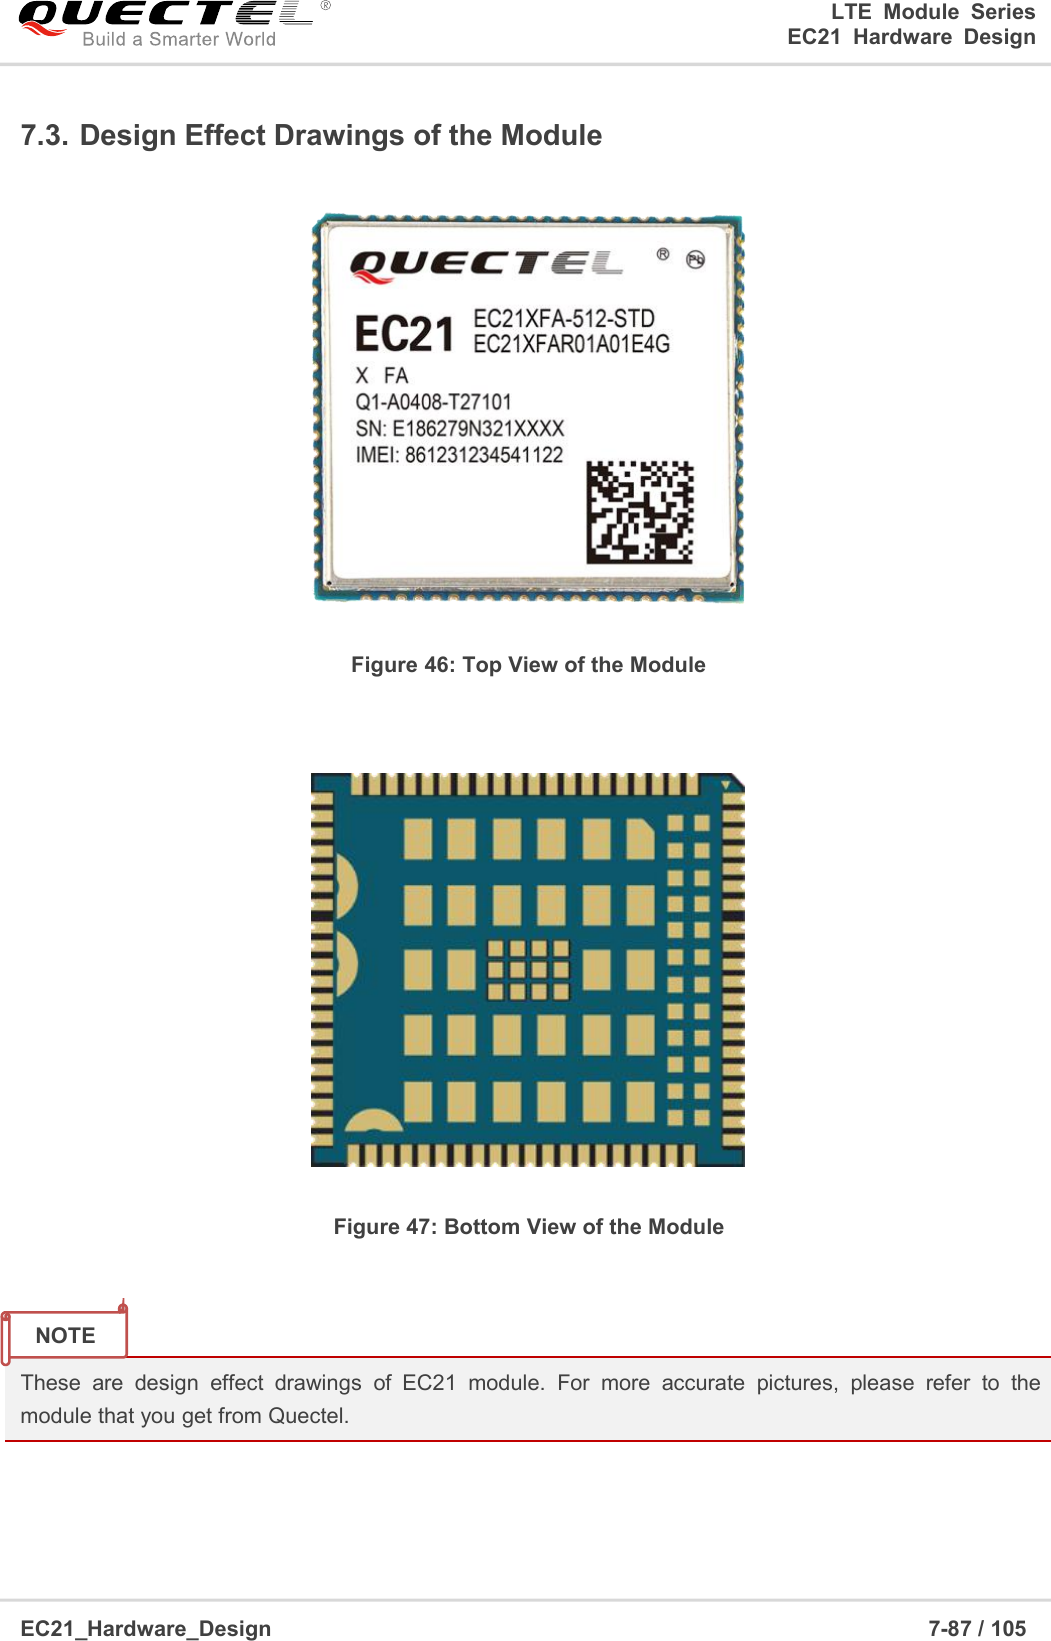 LTE Module SeriesEC21 Hardware DesignEC21_Hardware_Design 7-87 / 1057.3. Design Effect Drawings of the ModuleFigure 46: Top View of the ModuleFigure 47: Bottom View of the ModuleThese are design effect drawings of EC21 module. For more accurate pictures, please refer to themodule that you get from Quectel.NOTE